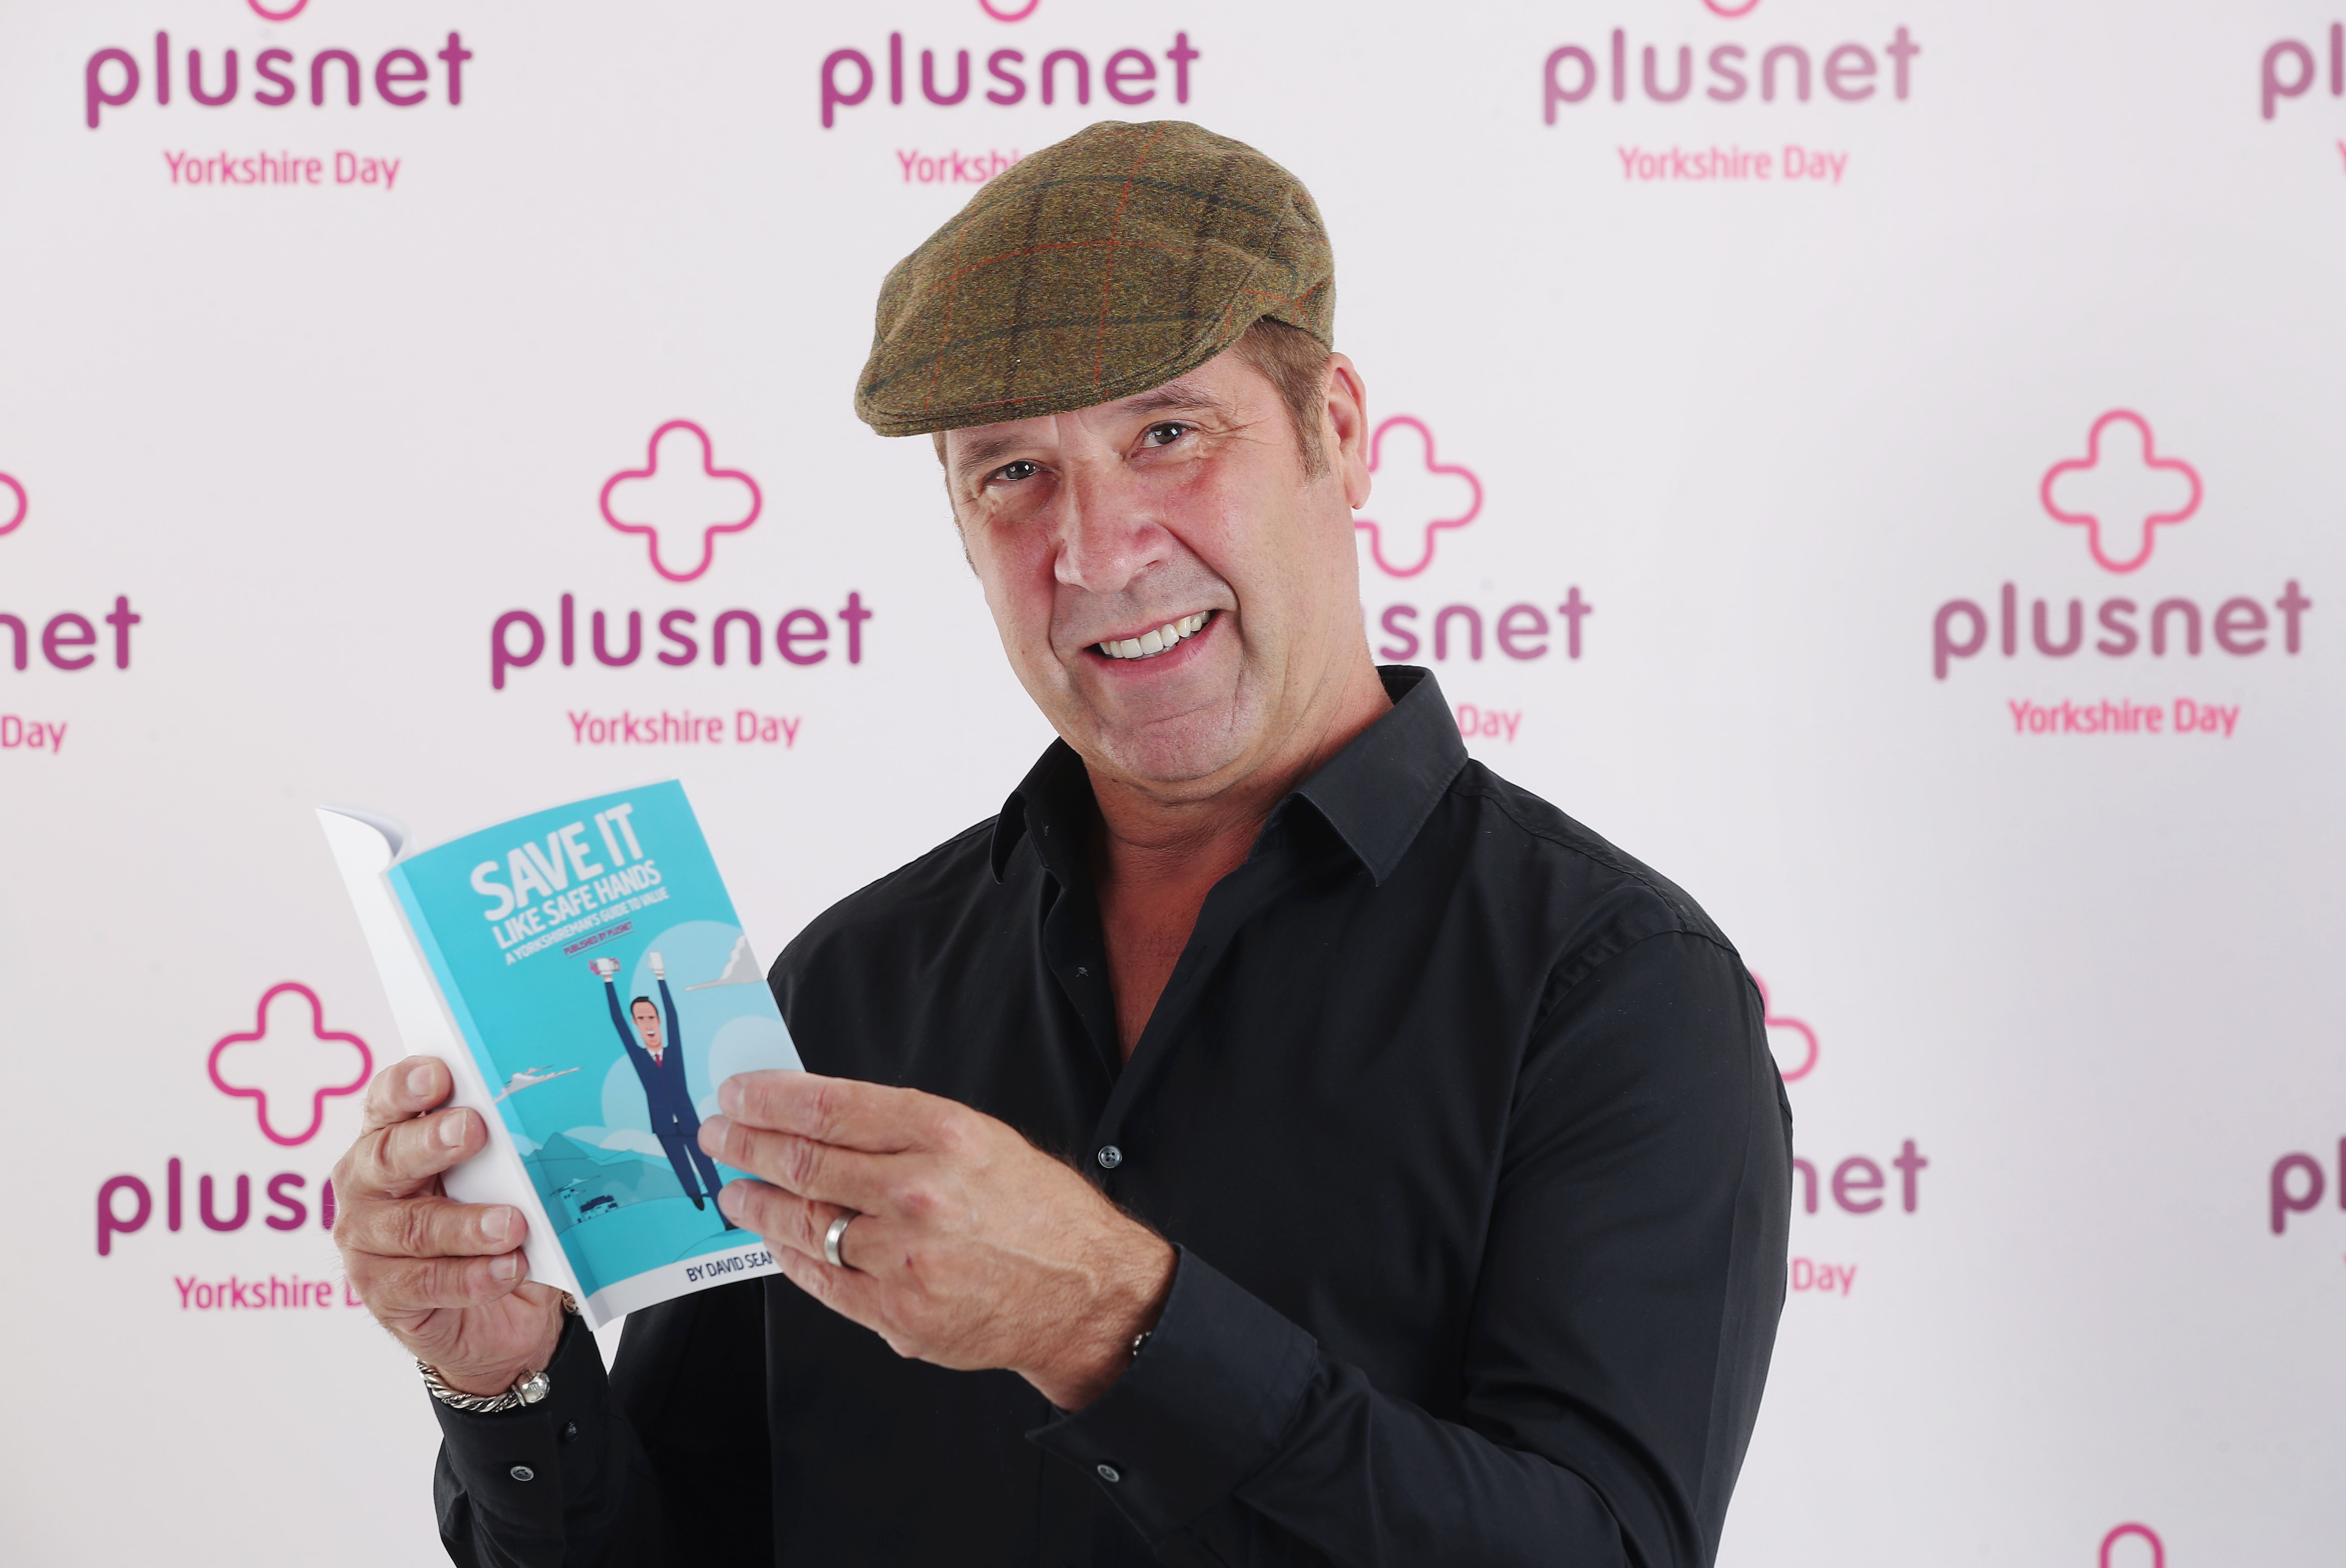 David Seaman has teamed up with Plusnet to release a book for Yorkshire Day 